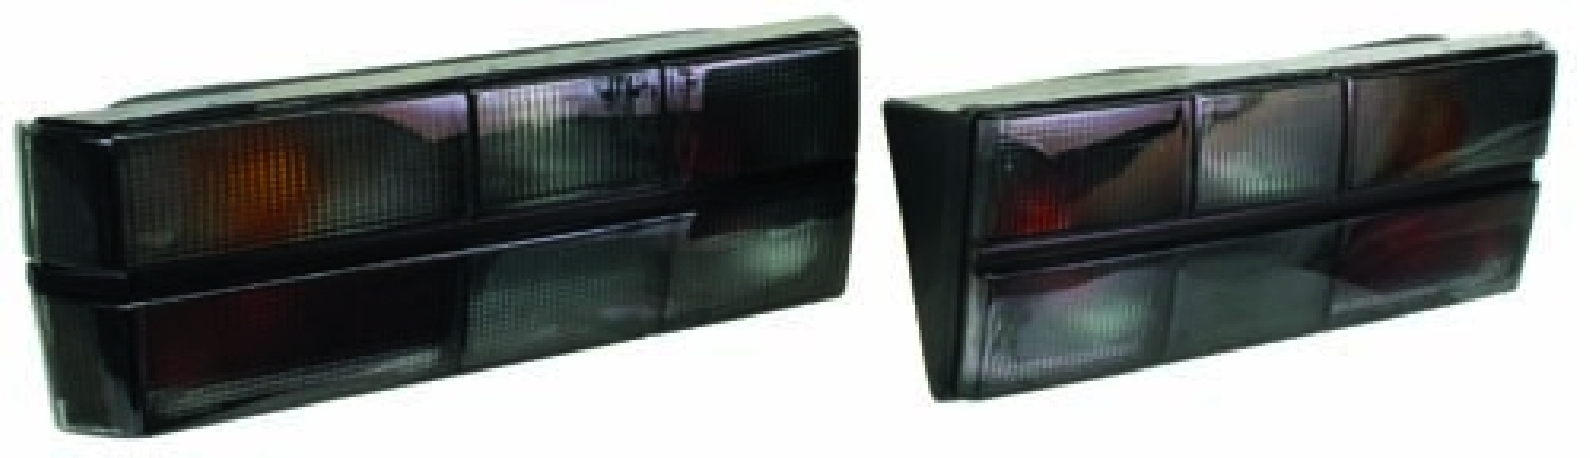 Rear lamps, Smoked style, Mk1 Golf series 2 79-83